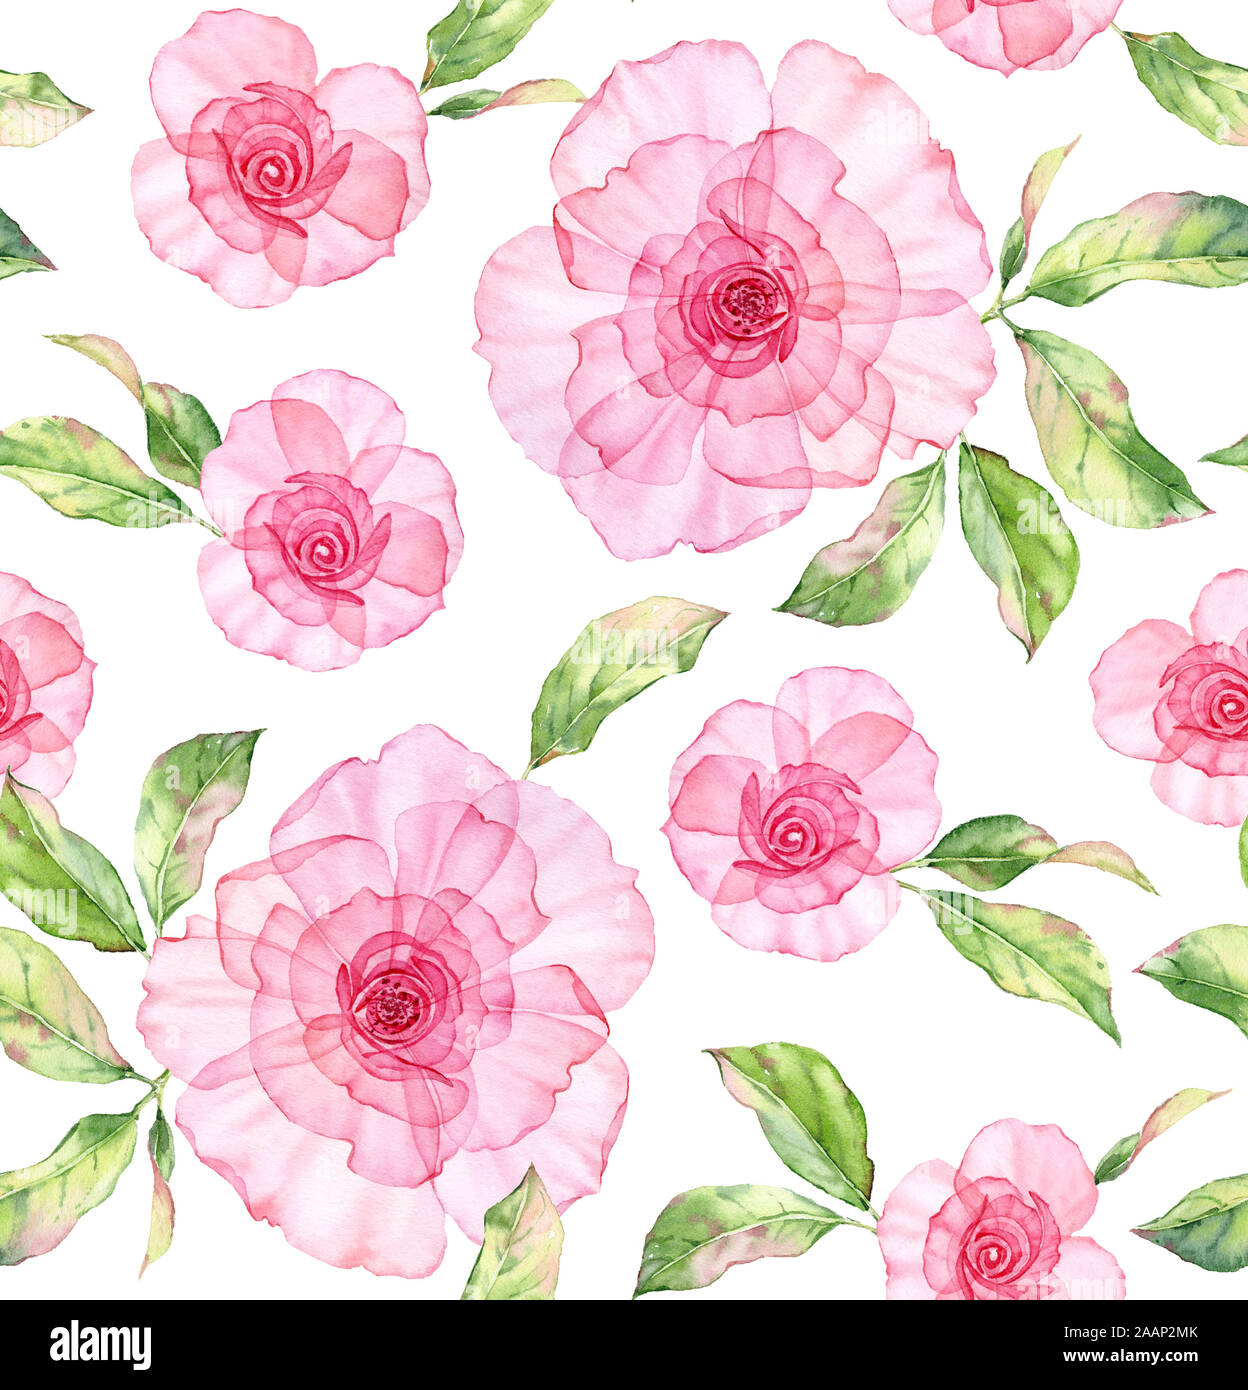 Transparent watercolor rose. Seamless floral pattern. Isolated hand ...